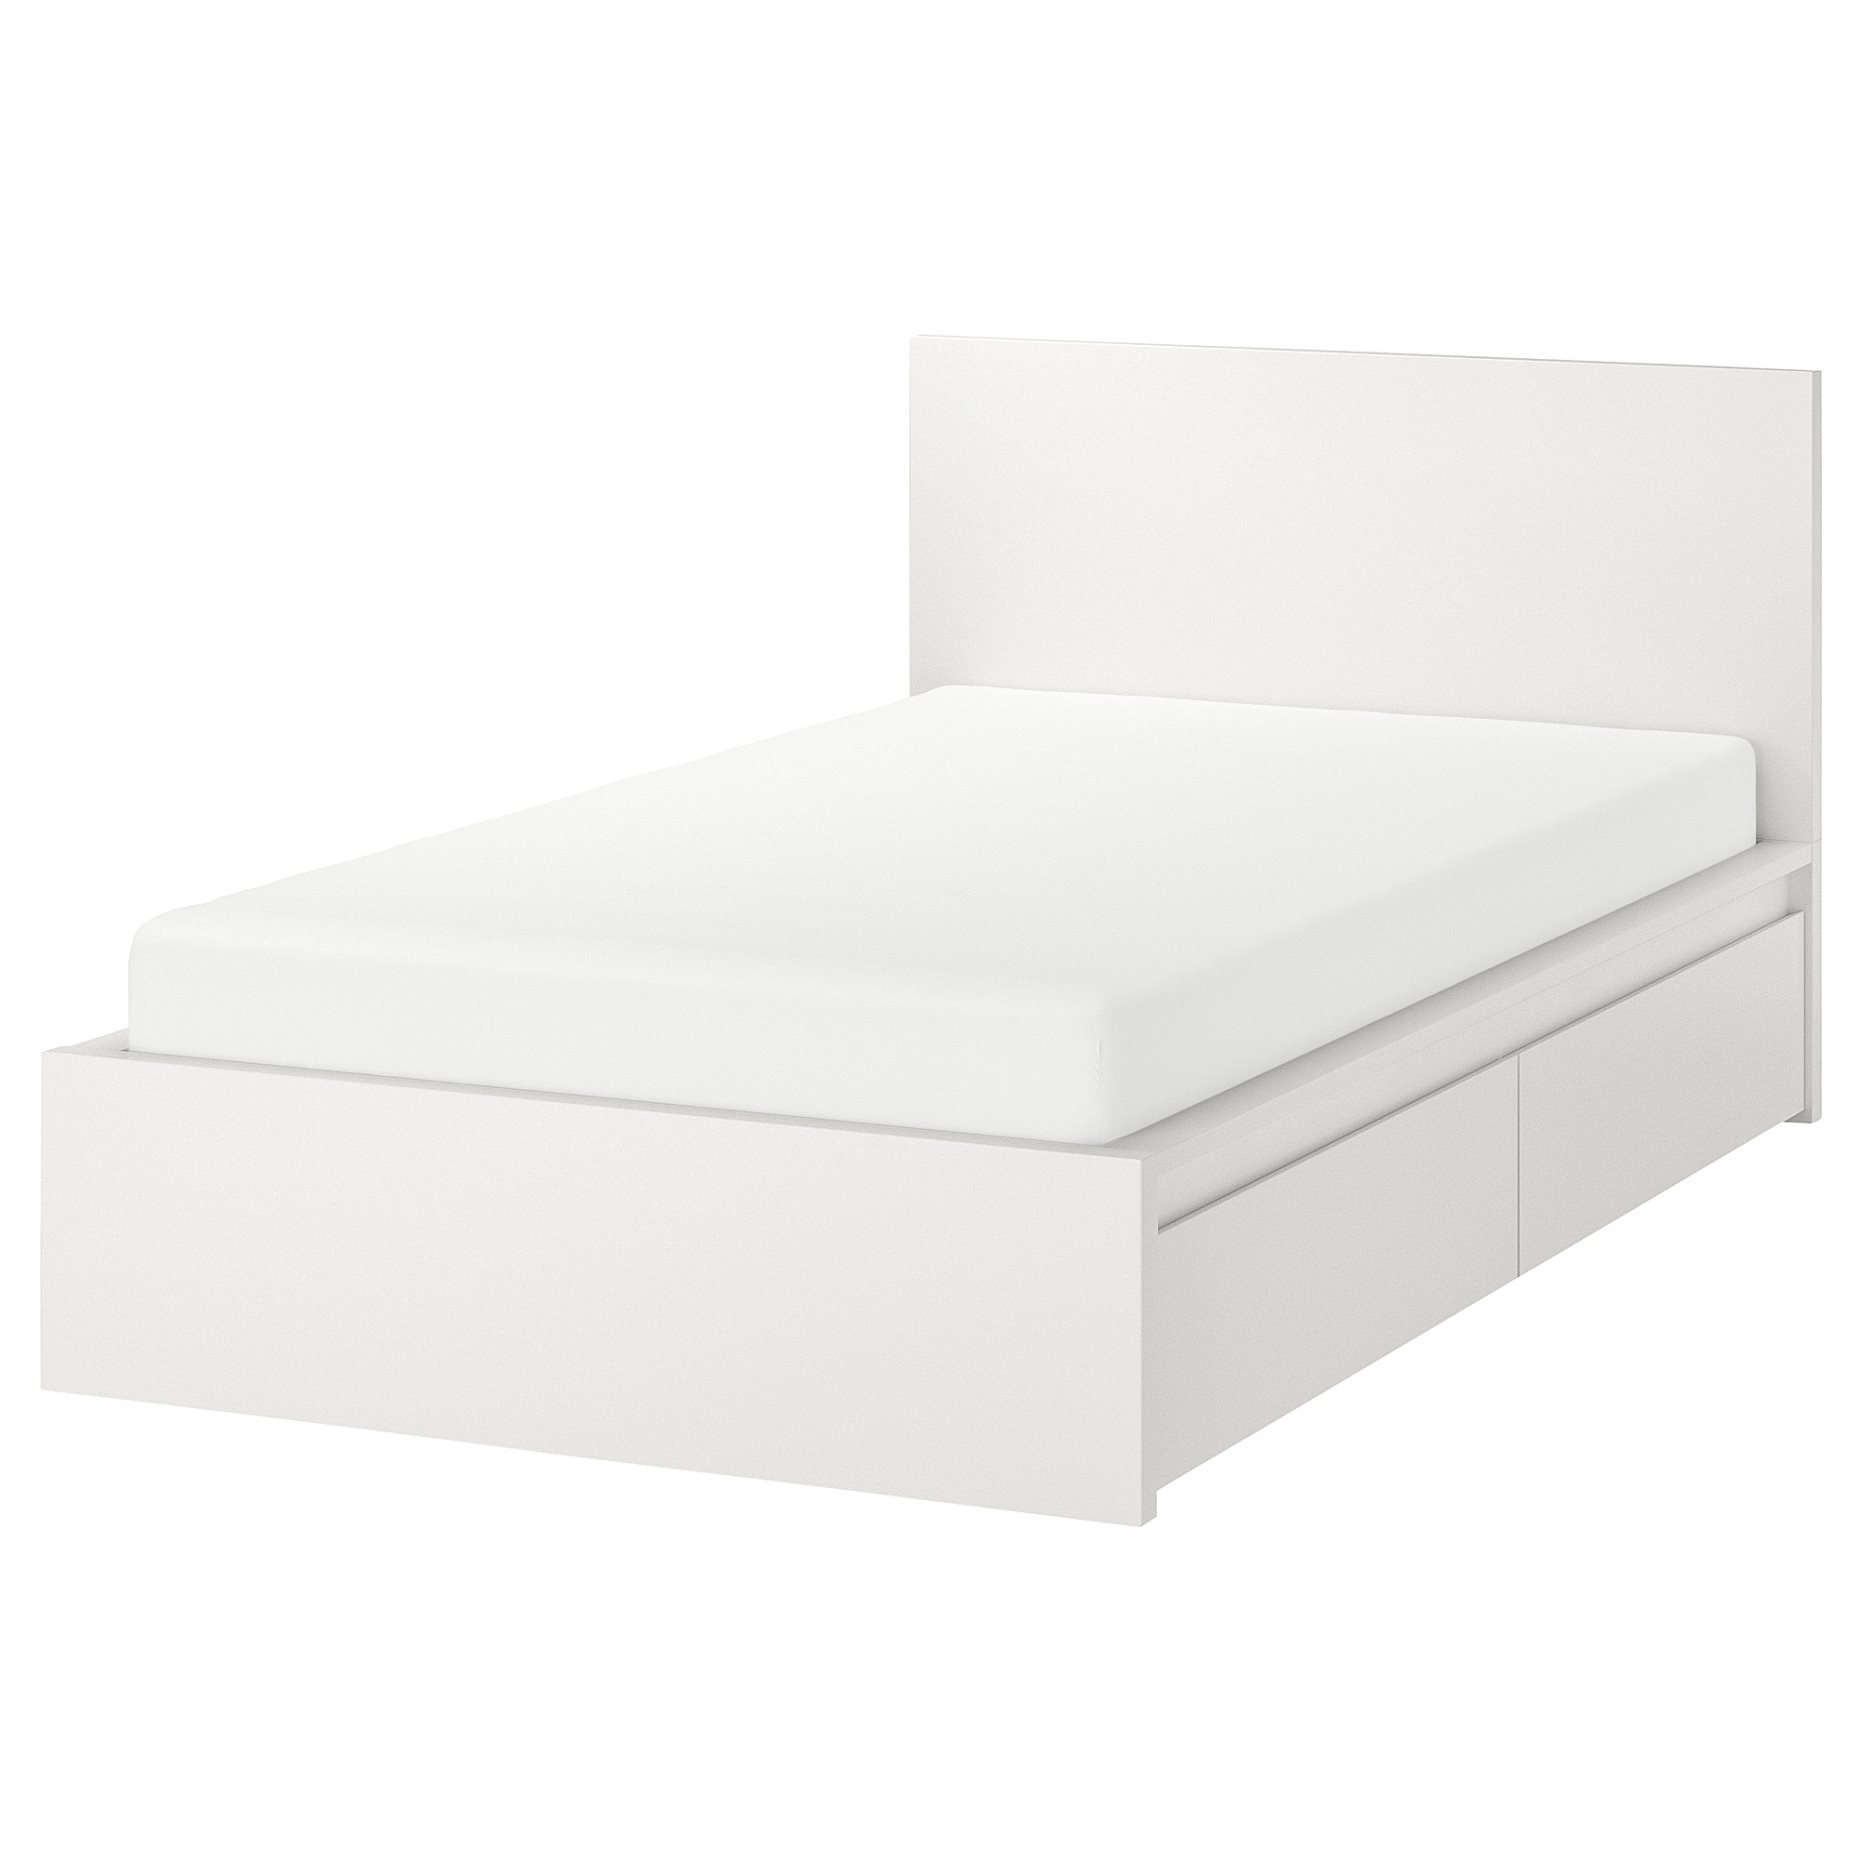 MALM, bed frame, high, with 2 storage boxes, 690.682.24